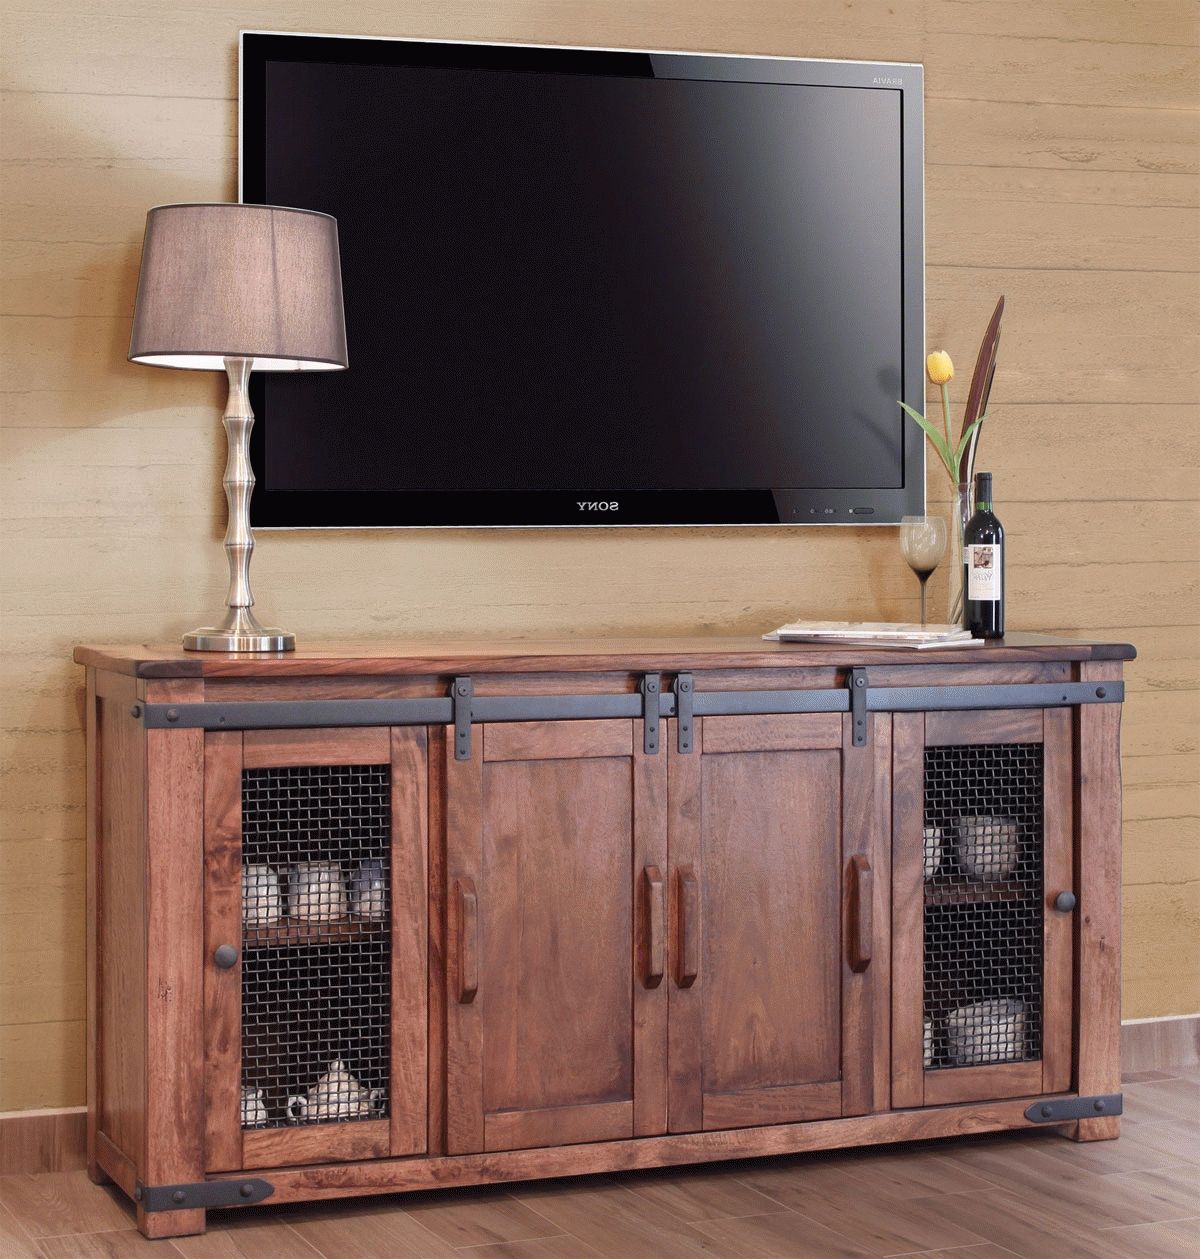 Rustic Tv Stand, Wood Tv Stand, Pine Tv Stand Inside Pine Wood Tv Stands (View 6 of 15)